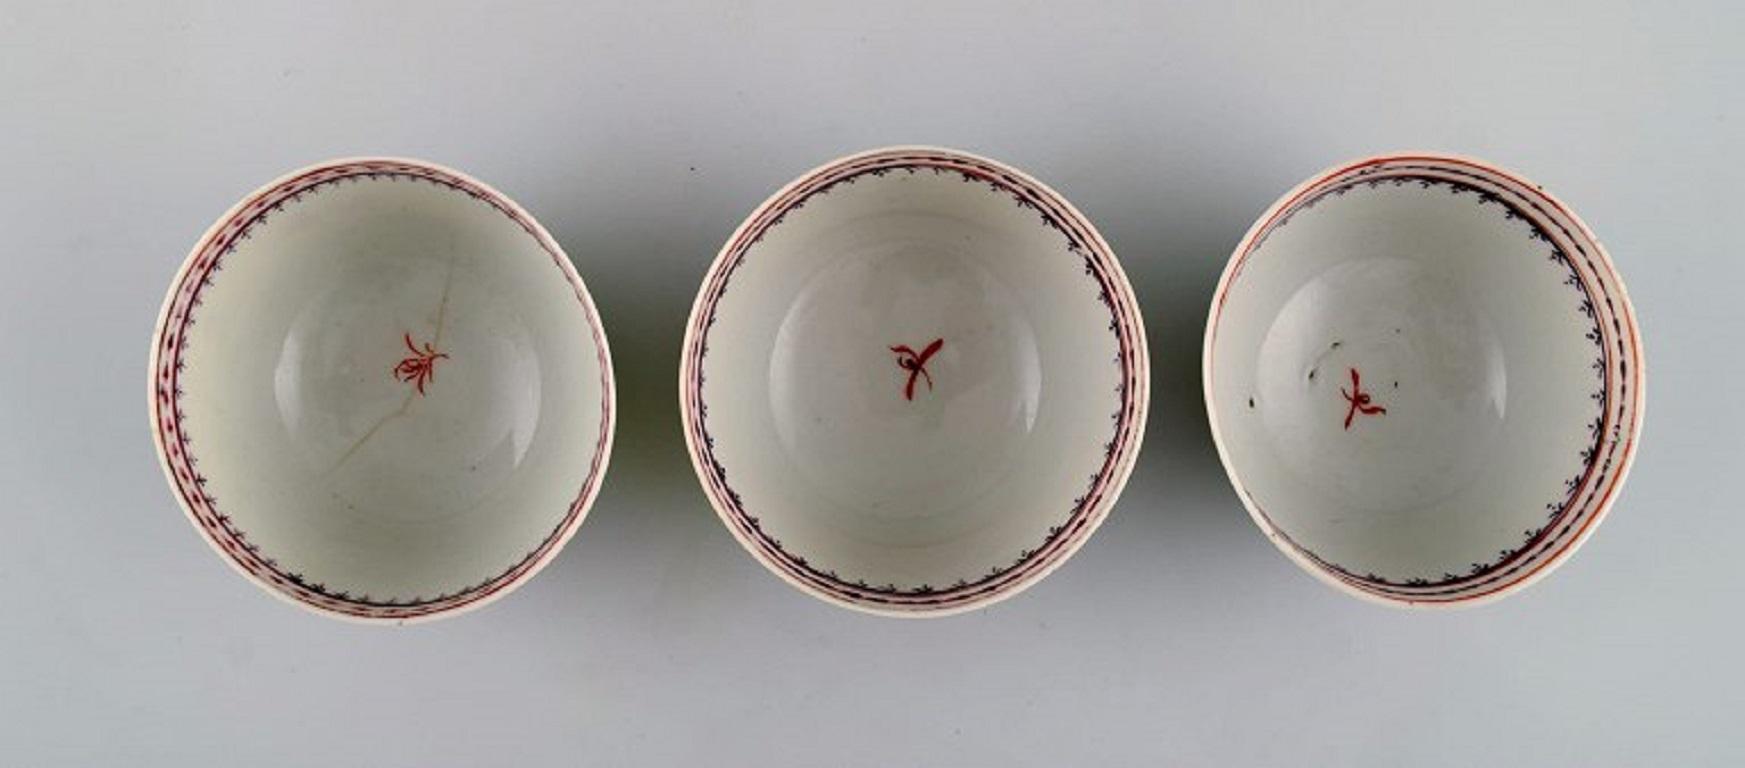 Three Antique Chinese Teacups in Hand-Painted Porcelain, Qian Long '1736-1795' In Excellent Condition For Sale In Copenhagen, DK